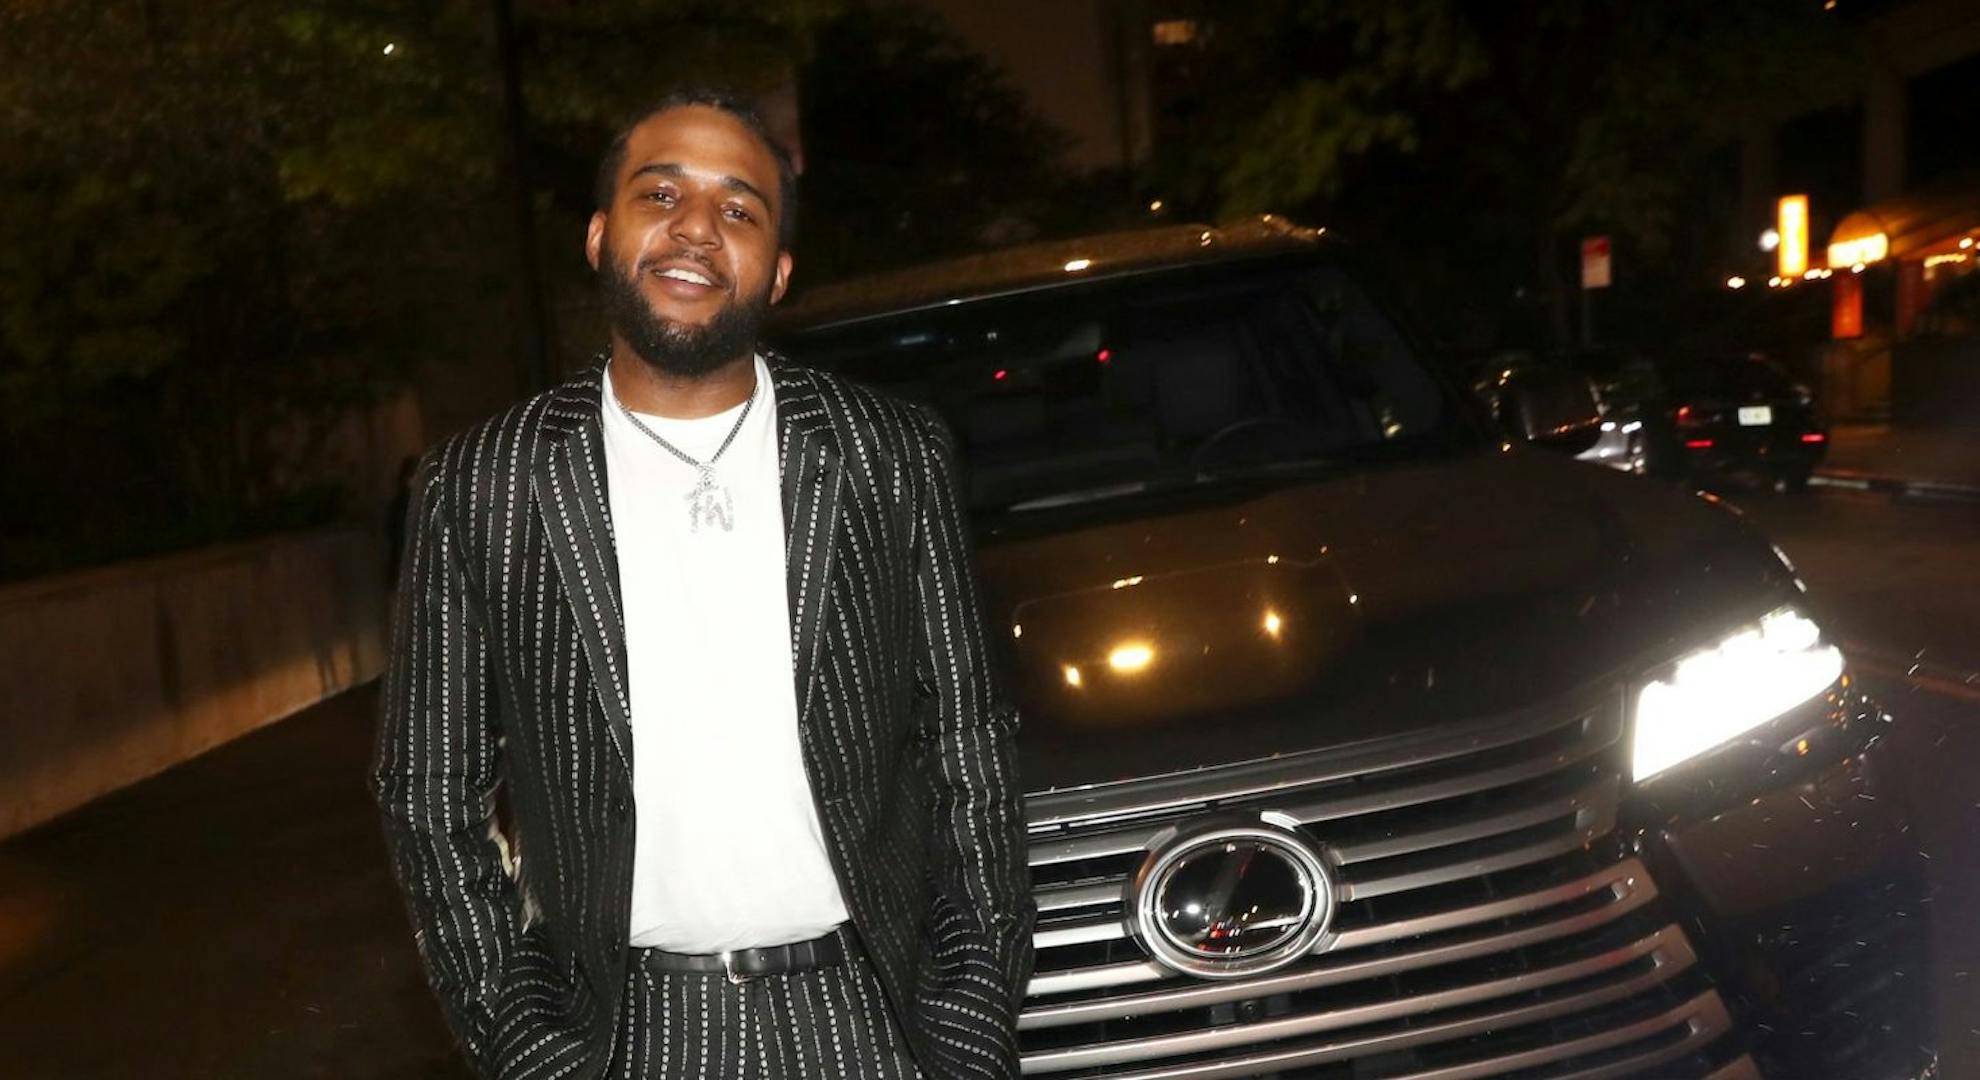 CJ Wallace attends the CJ Wallace & Lexus Celebrate Hip-Hop and Honor the Life of Christopher Wallace (a.k.a The Notorious B.I.G) at the Lil' Kim Tribute Gala at Gustavino's on May 20, 2022 in New York City. (Photo by Johnny Nunez/Getty Images for Lexus)